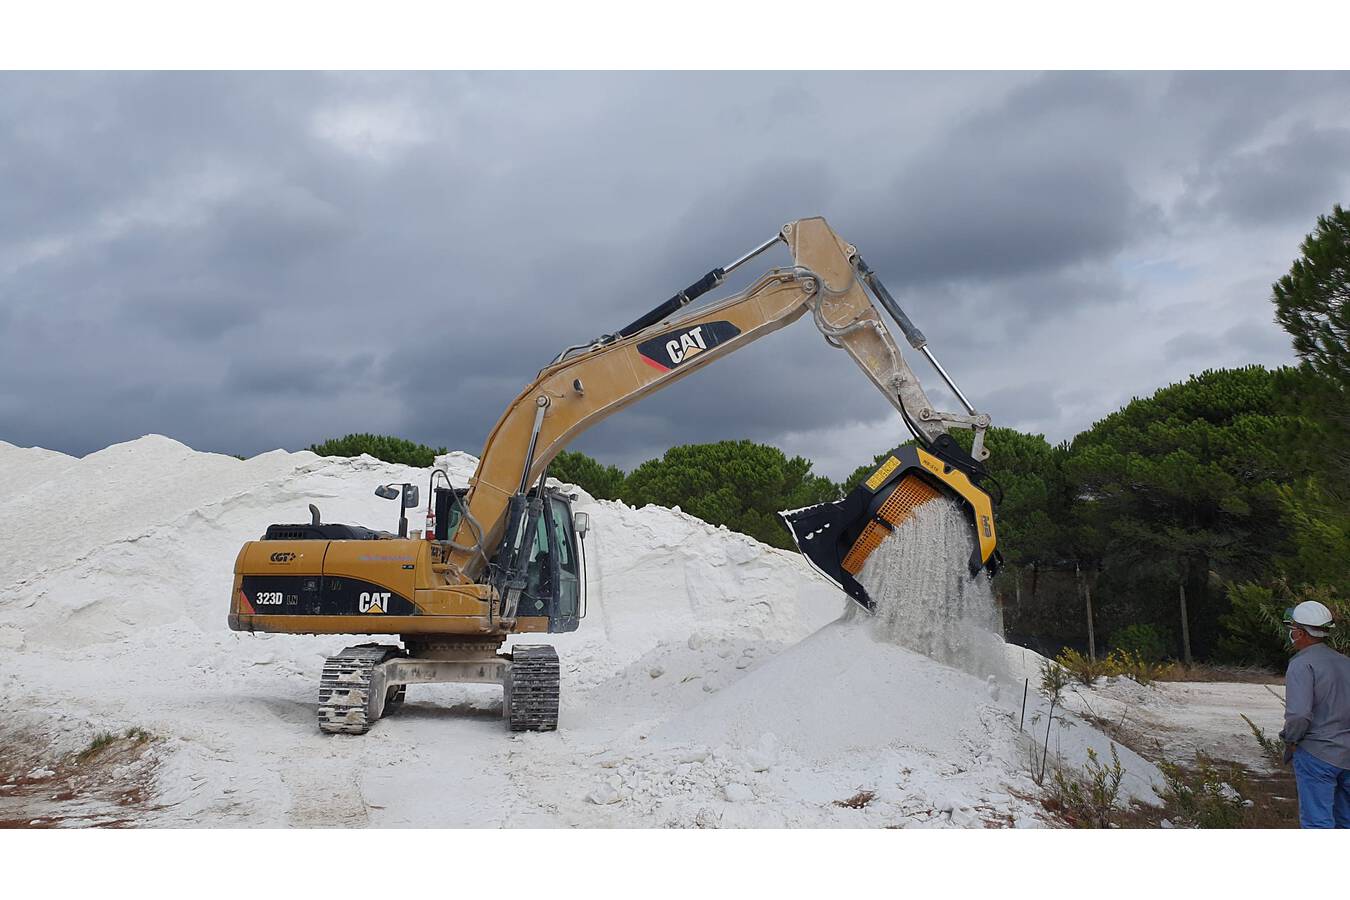 Unusual recycling stories: Gypsum A few tricks are enough to improve recycling and reusing materials, even in the most” strange” processes.